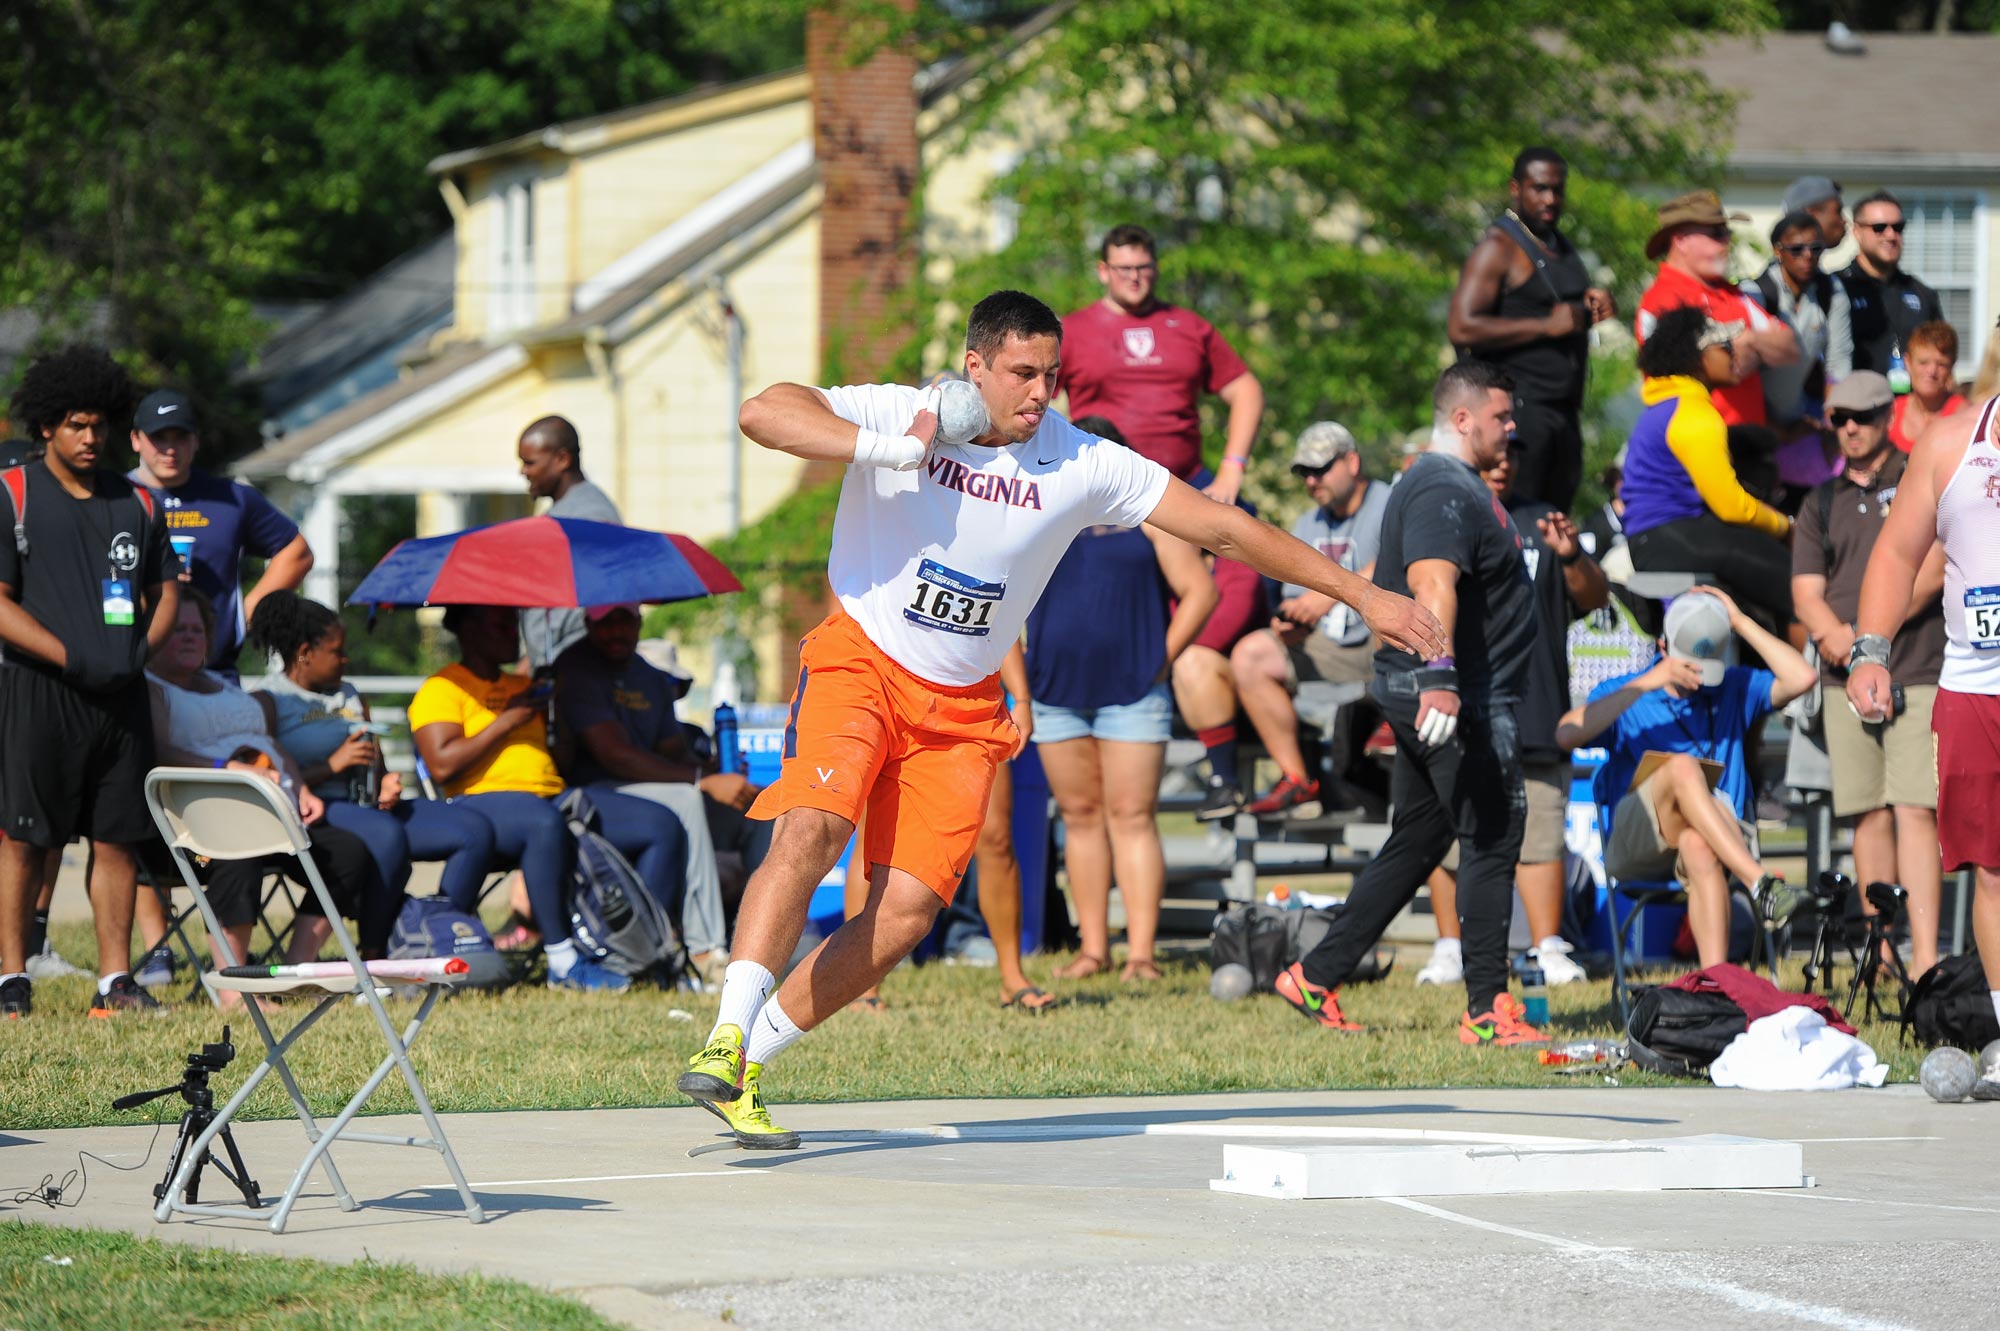 Filip Mihaljevic throwing a shotput during a competition